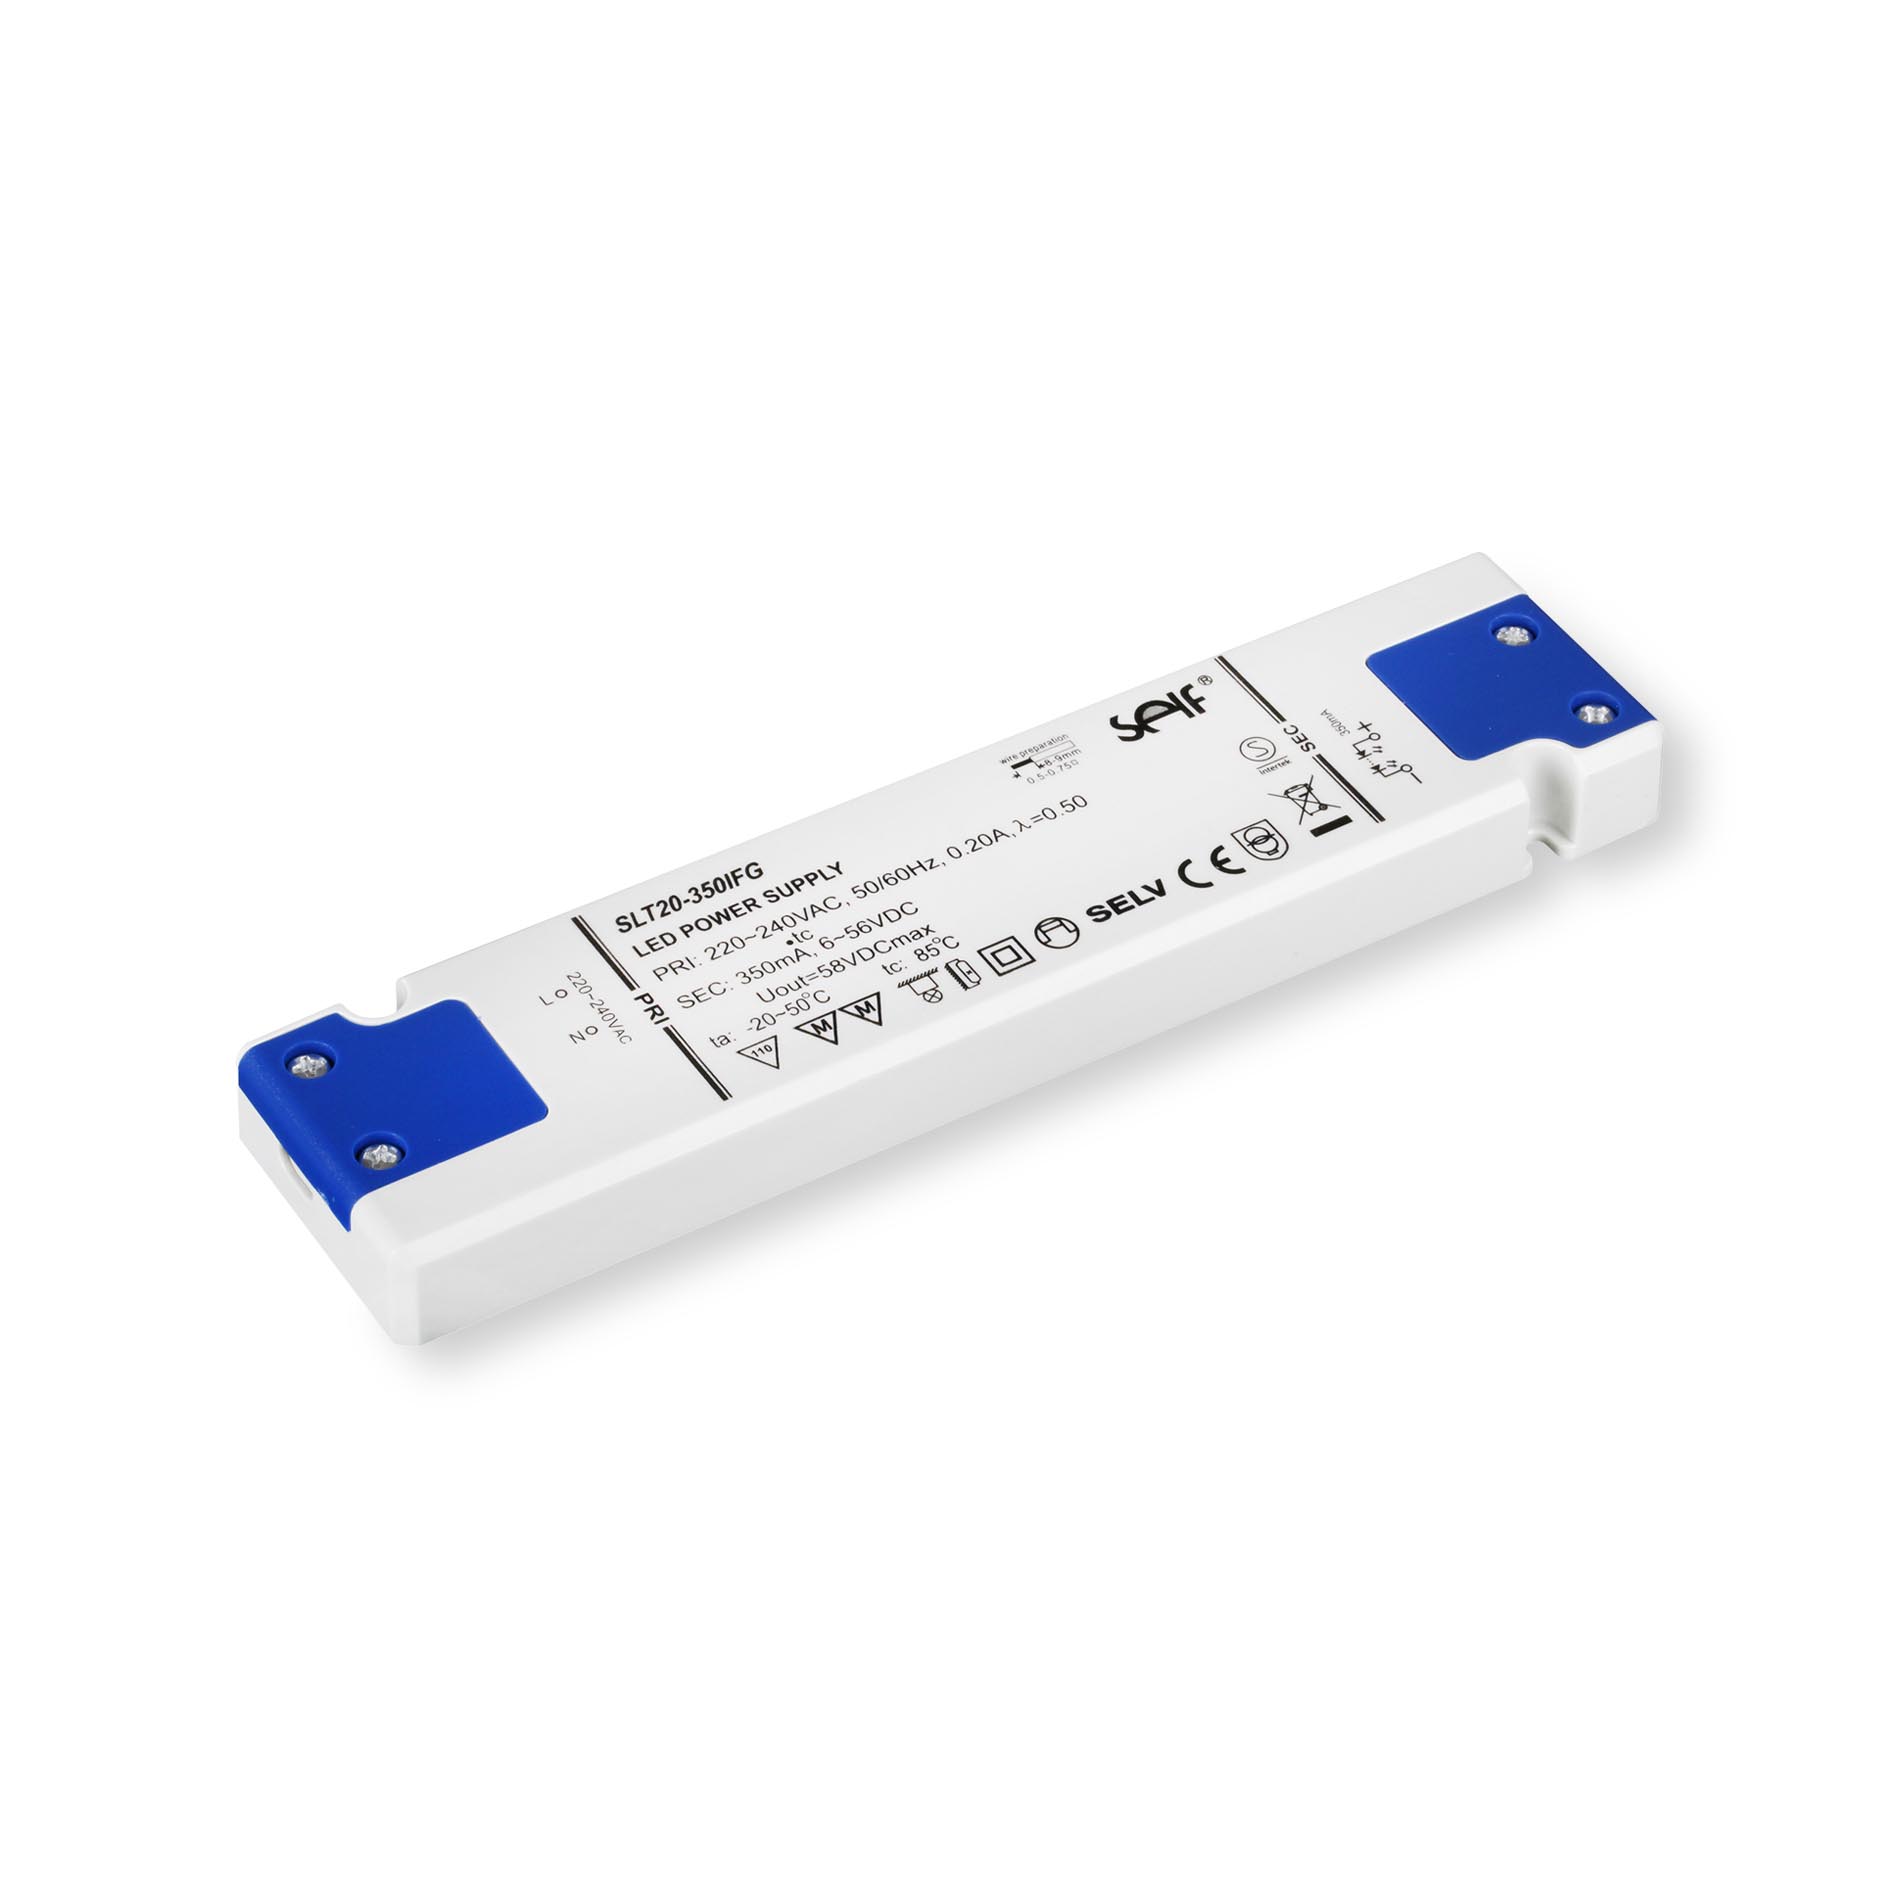 Self SLT20-350IFG (350 mA) constant current supply